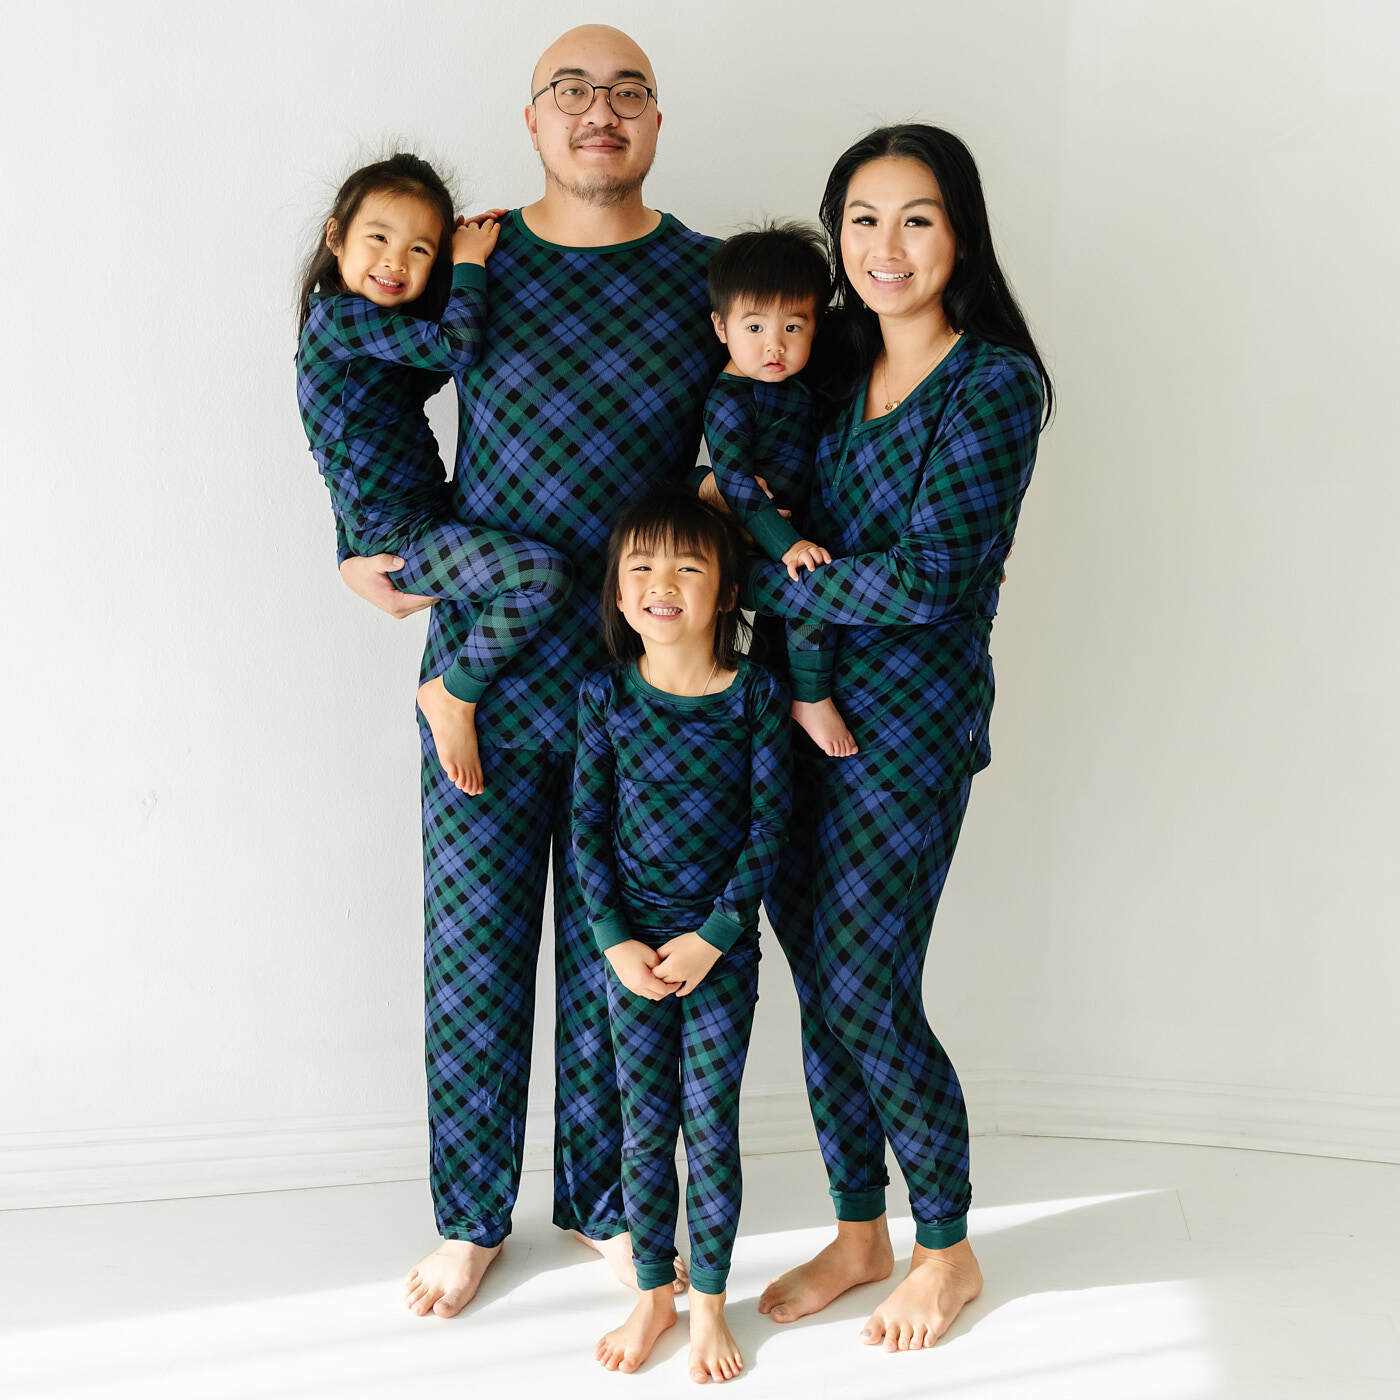 Family Matching Pajamas are Always a Good Idea, Here’s Why